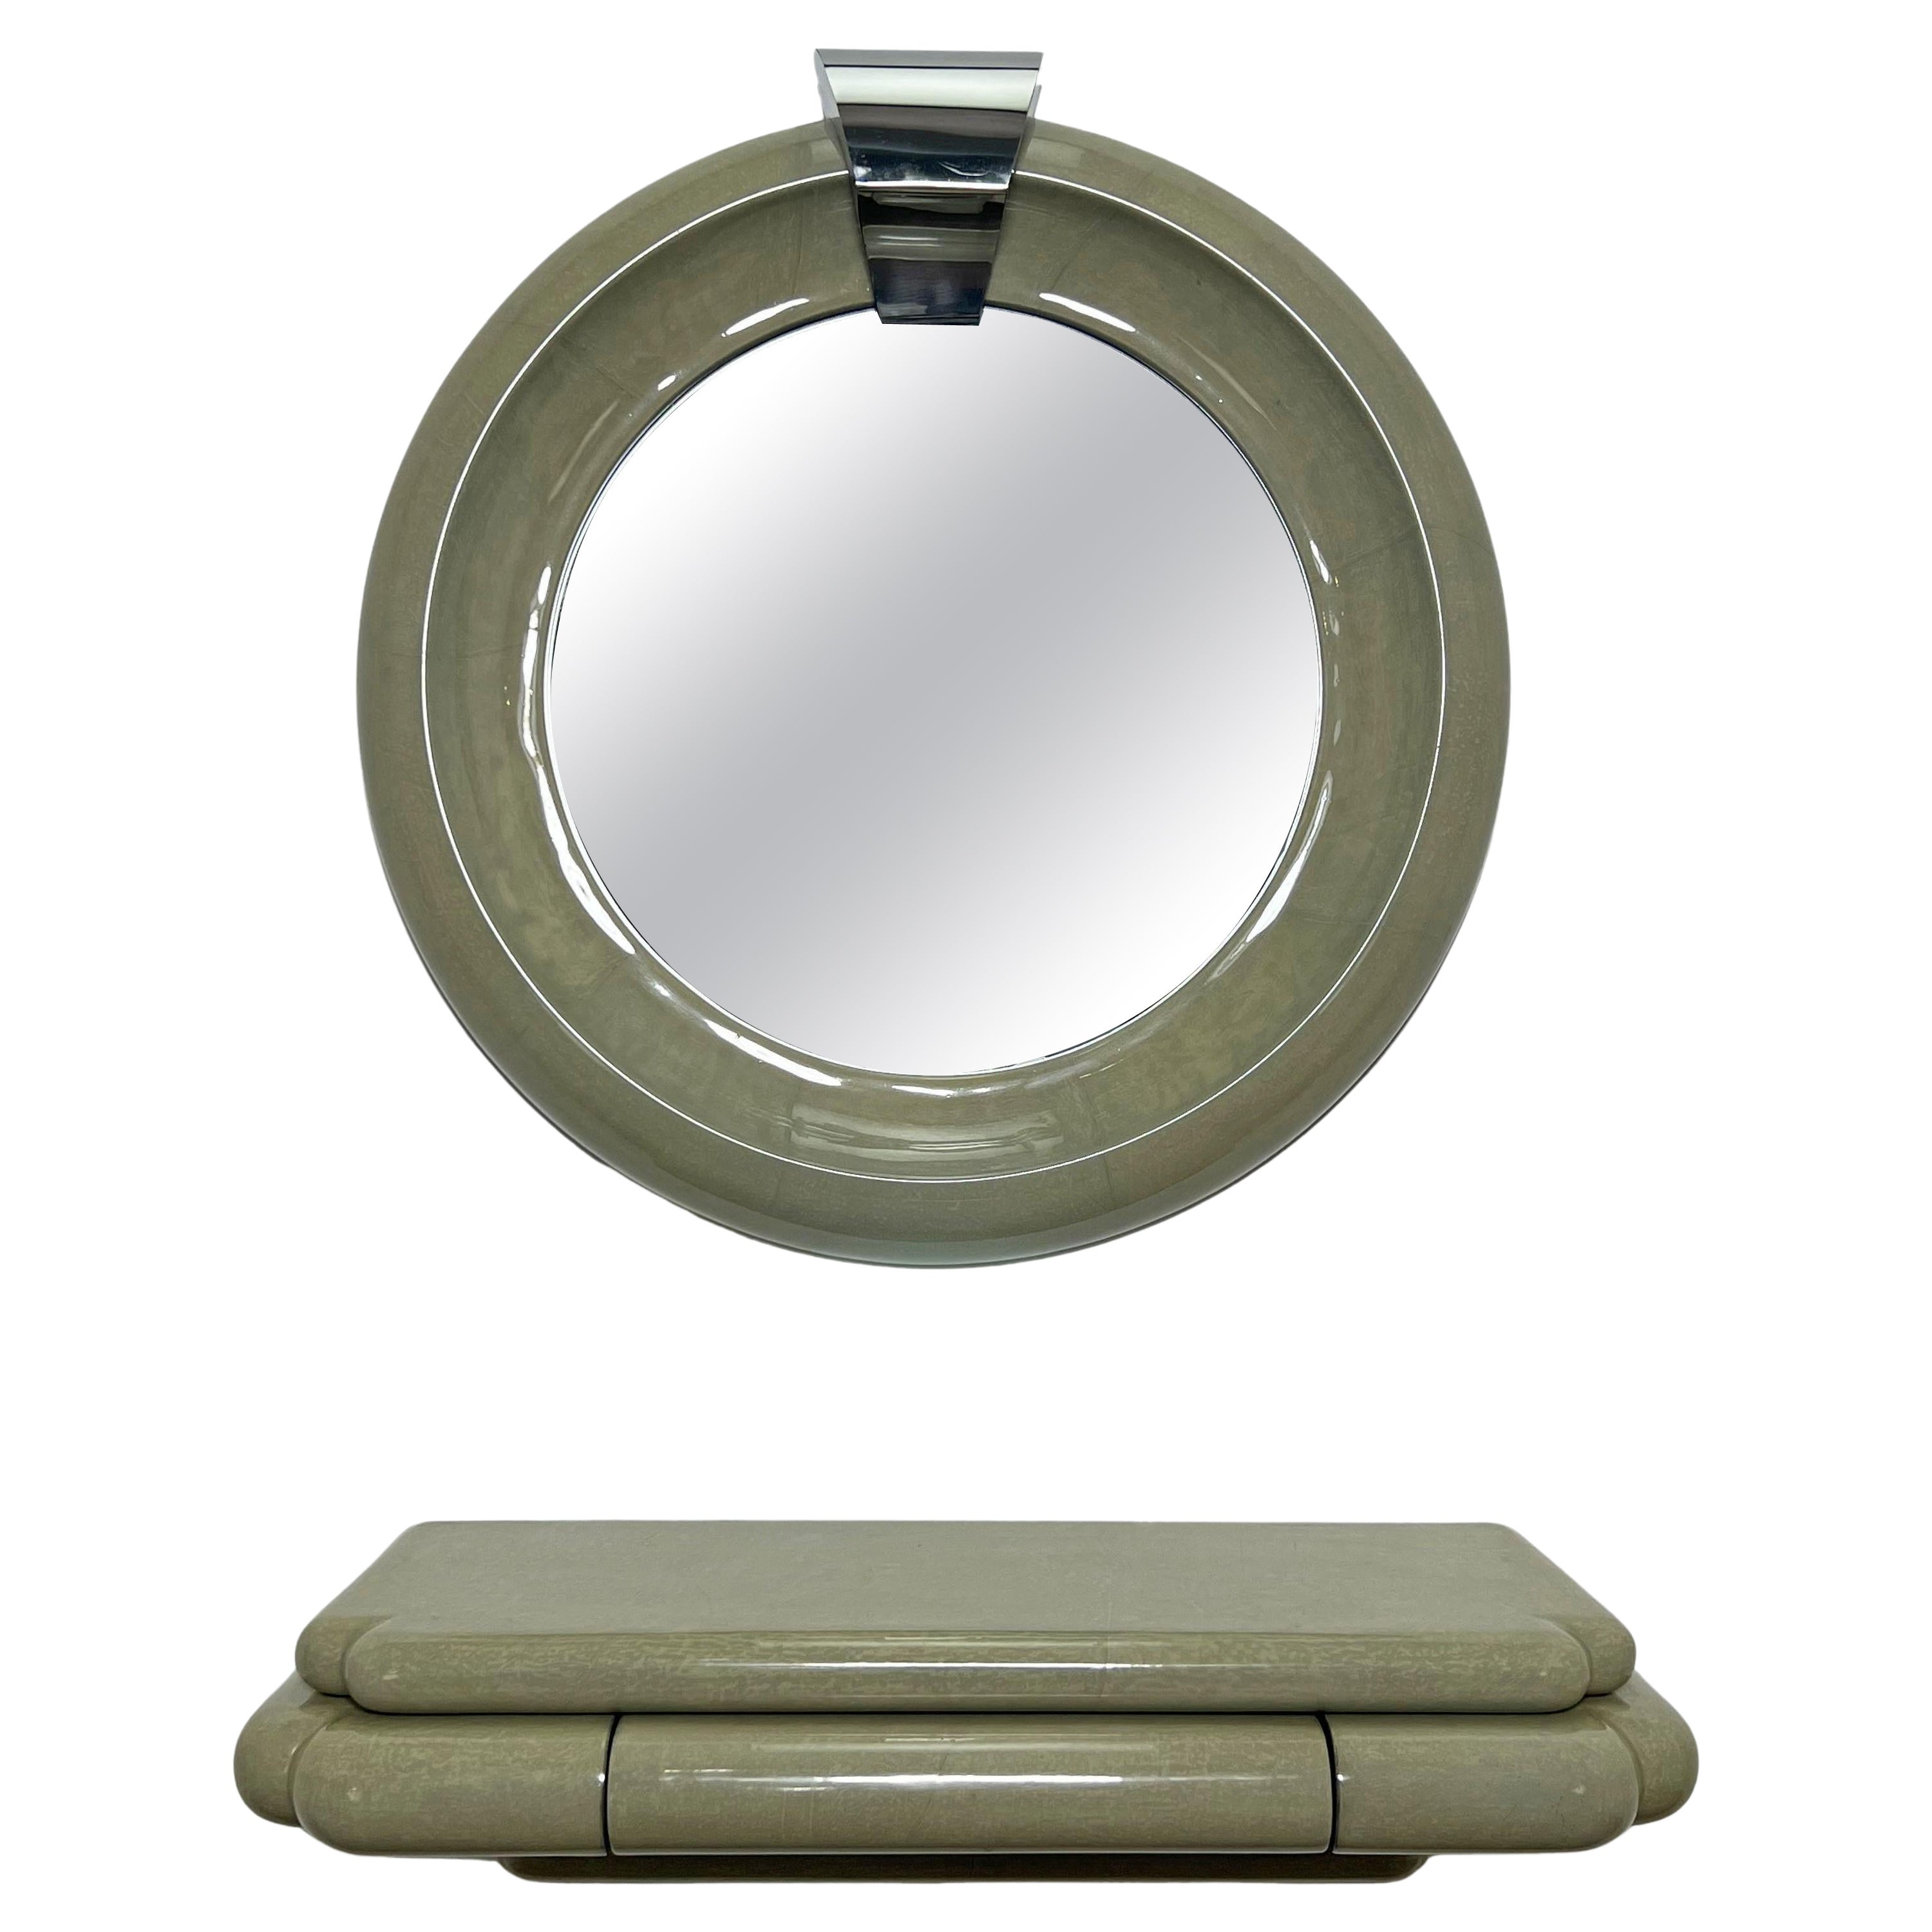 Signed Jimeco Ltda Goatskin Mirror With Matching Wall Mounted Console, d. 1987 For Sale